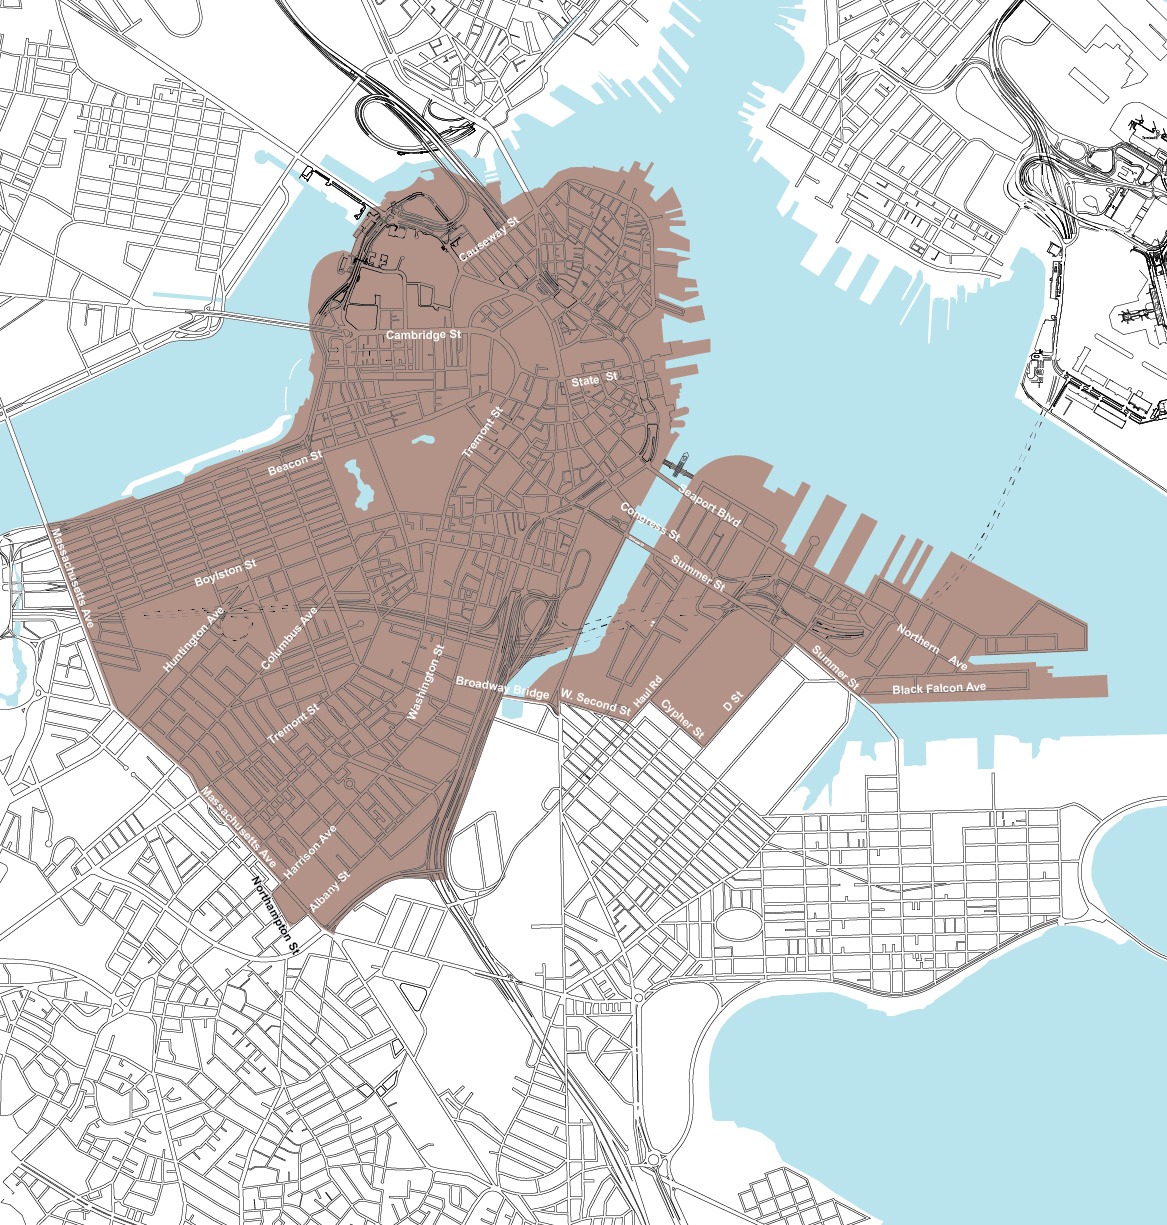 Figure 3-2 is a map displaying the Boston Business District boundaries and the roadways within and surrounding the area.